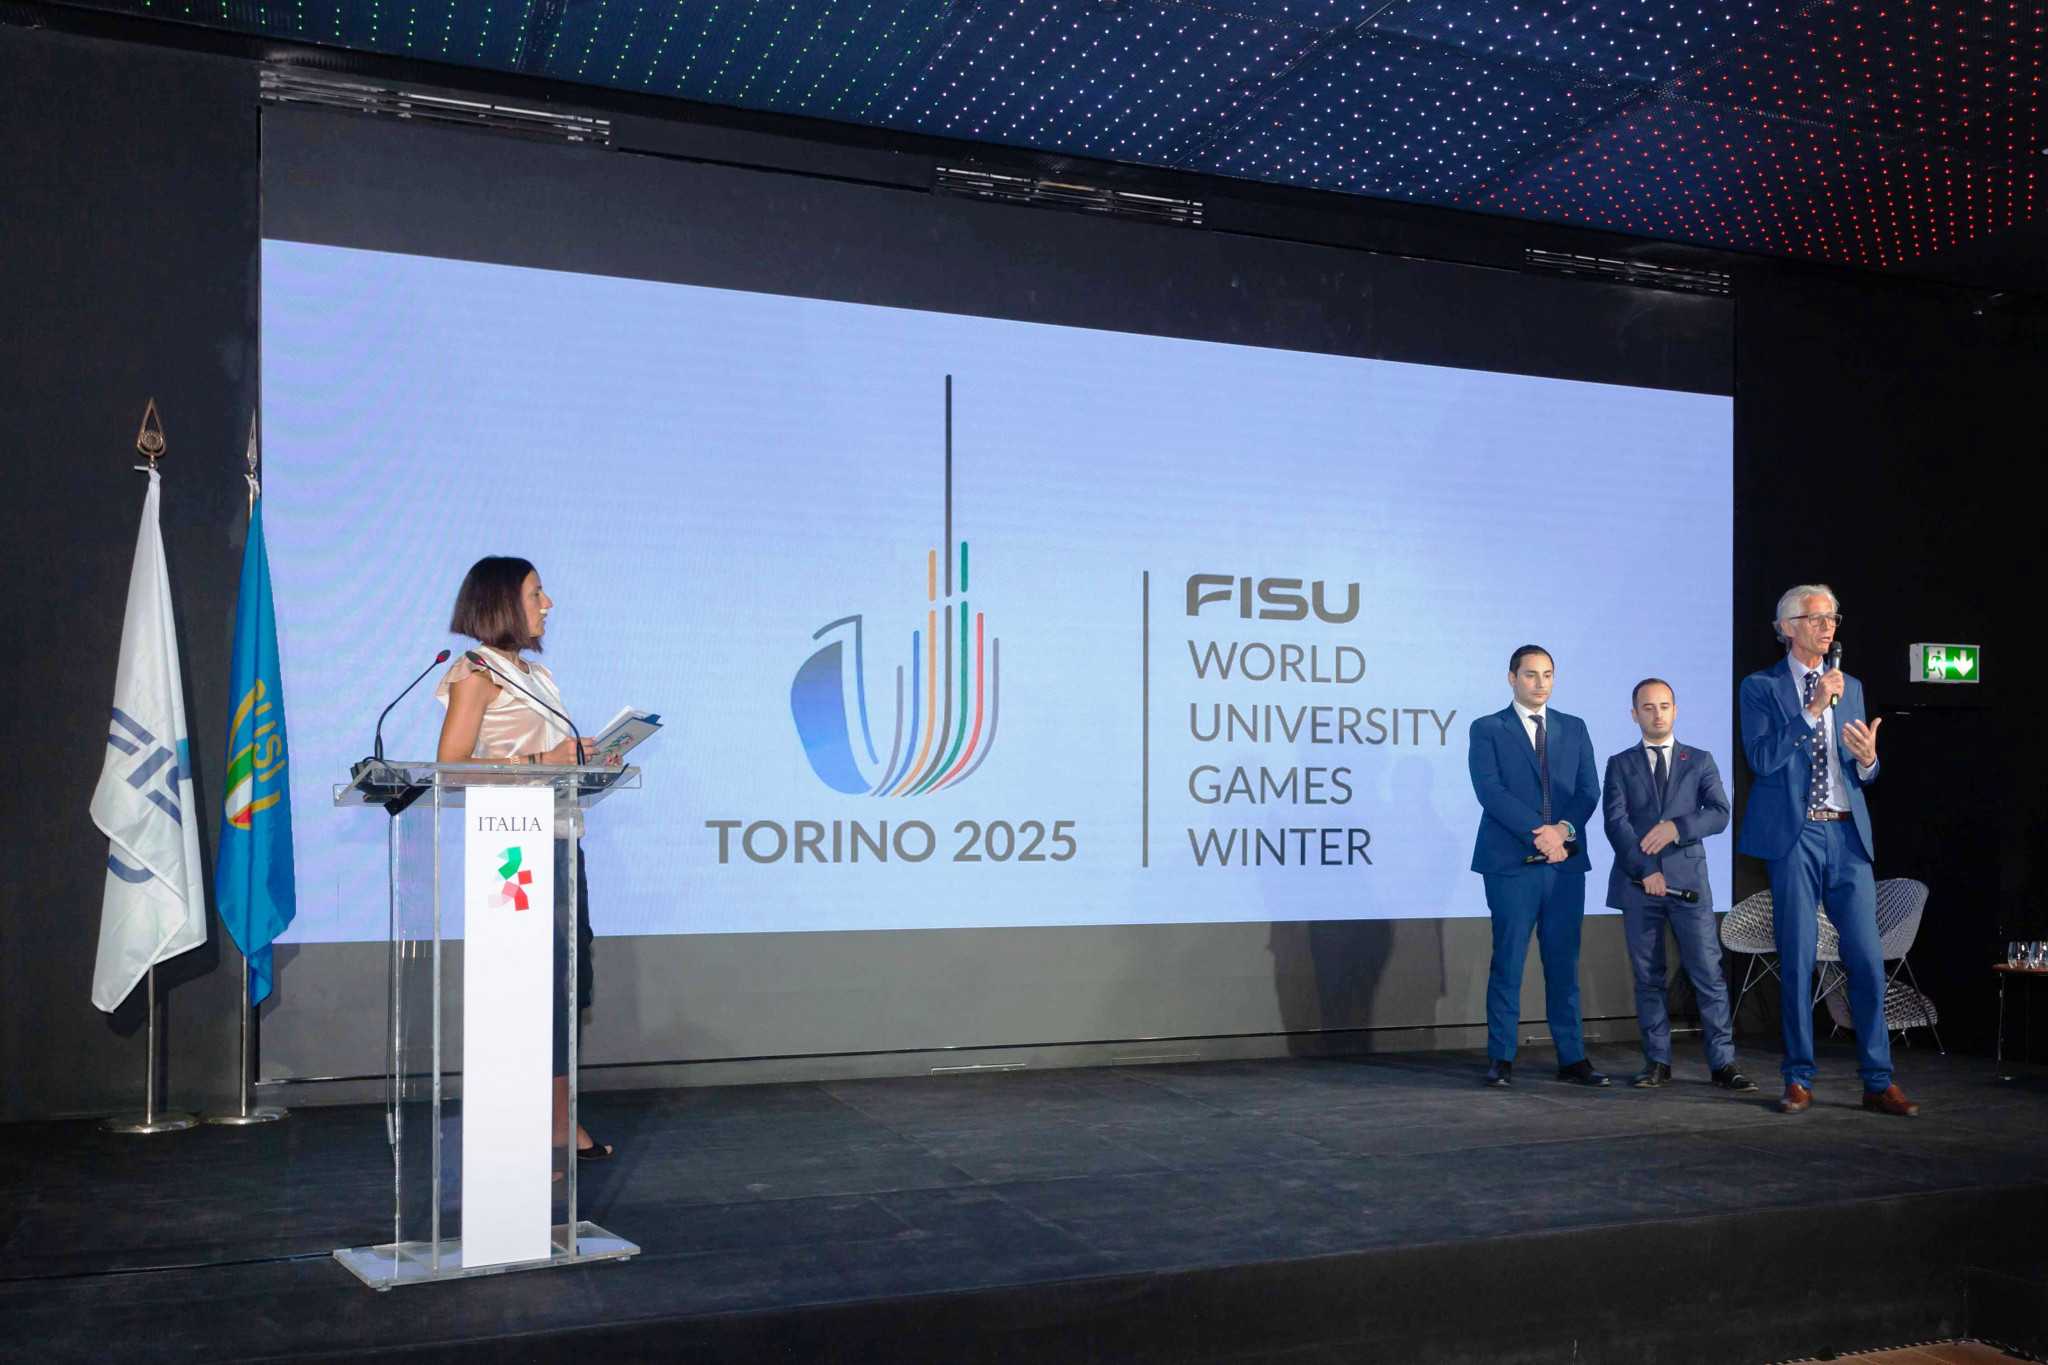 The Turin 2025 FISU Games has started its search for people to fill 10 key positions before the event ©Turin 2025